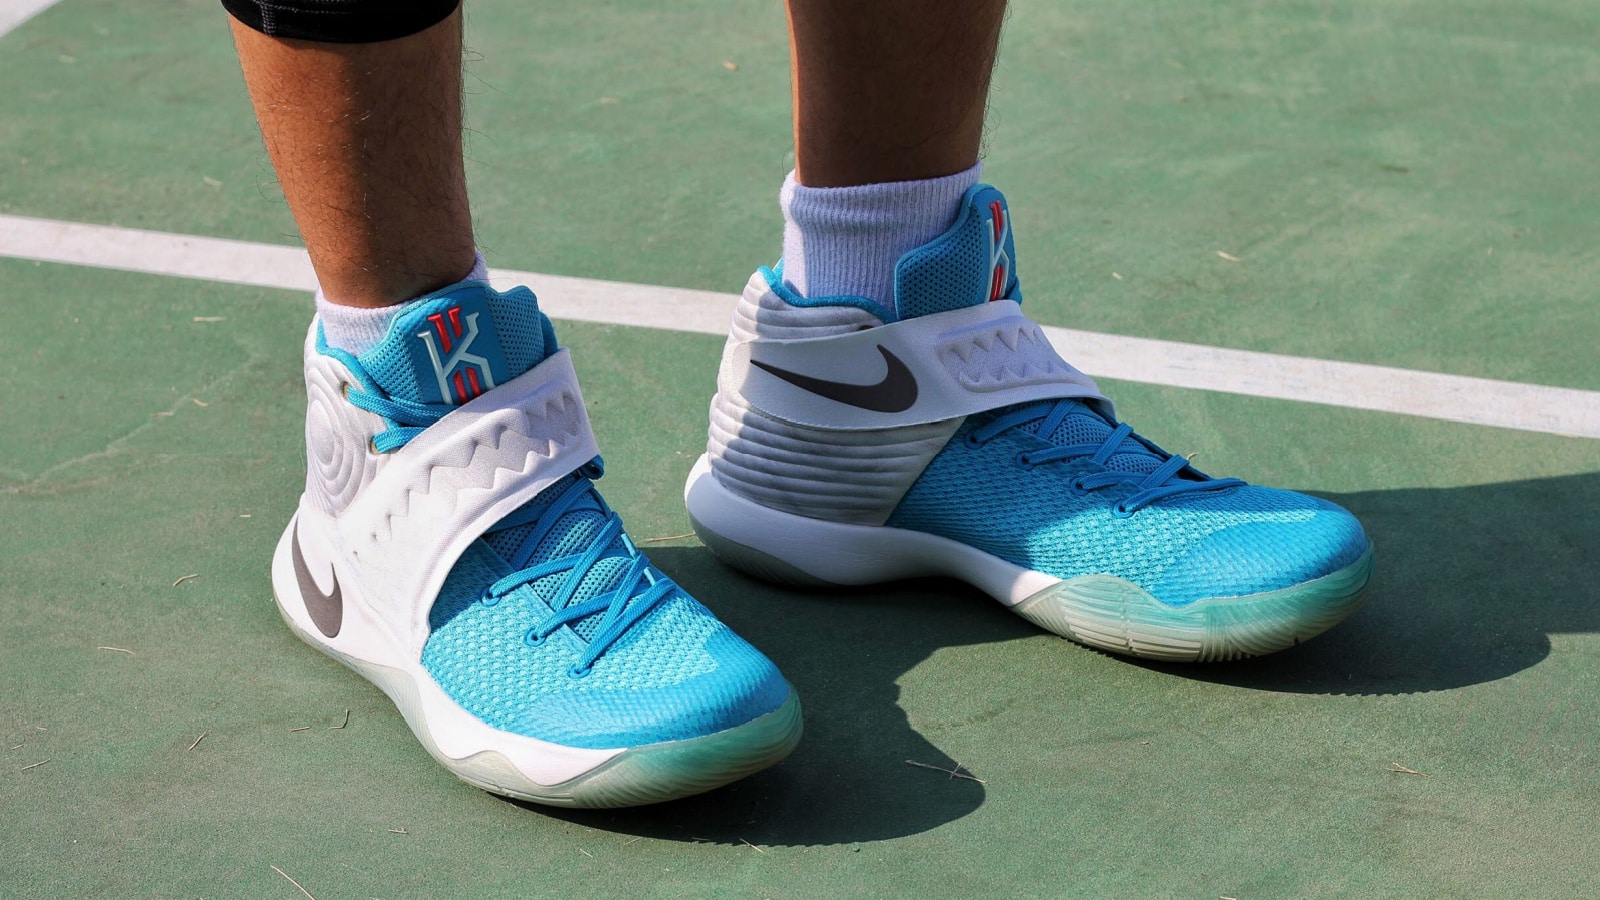 Ho Chi Minh City, Vietnam - March 9th 2019: Nike Kyrie 2 Blue Basketball shoes on Basketball court